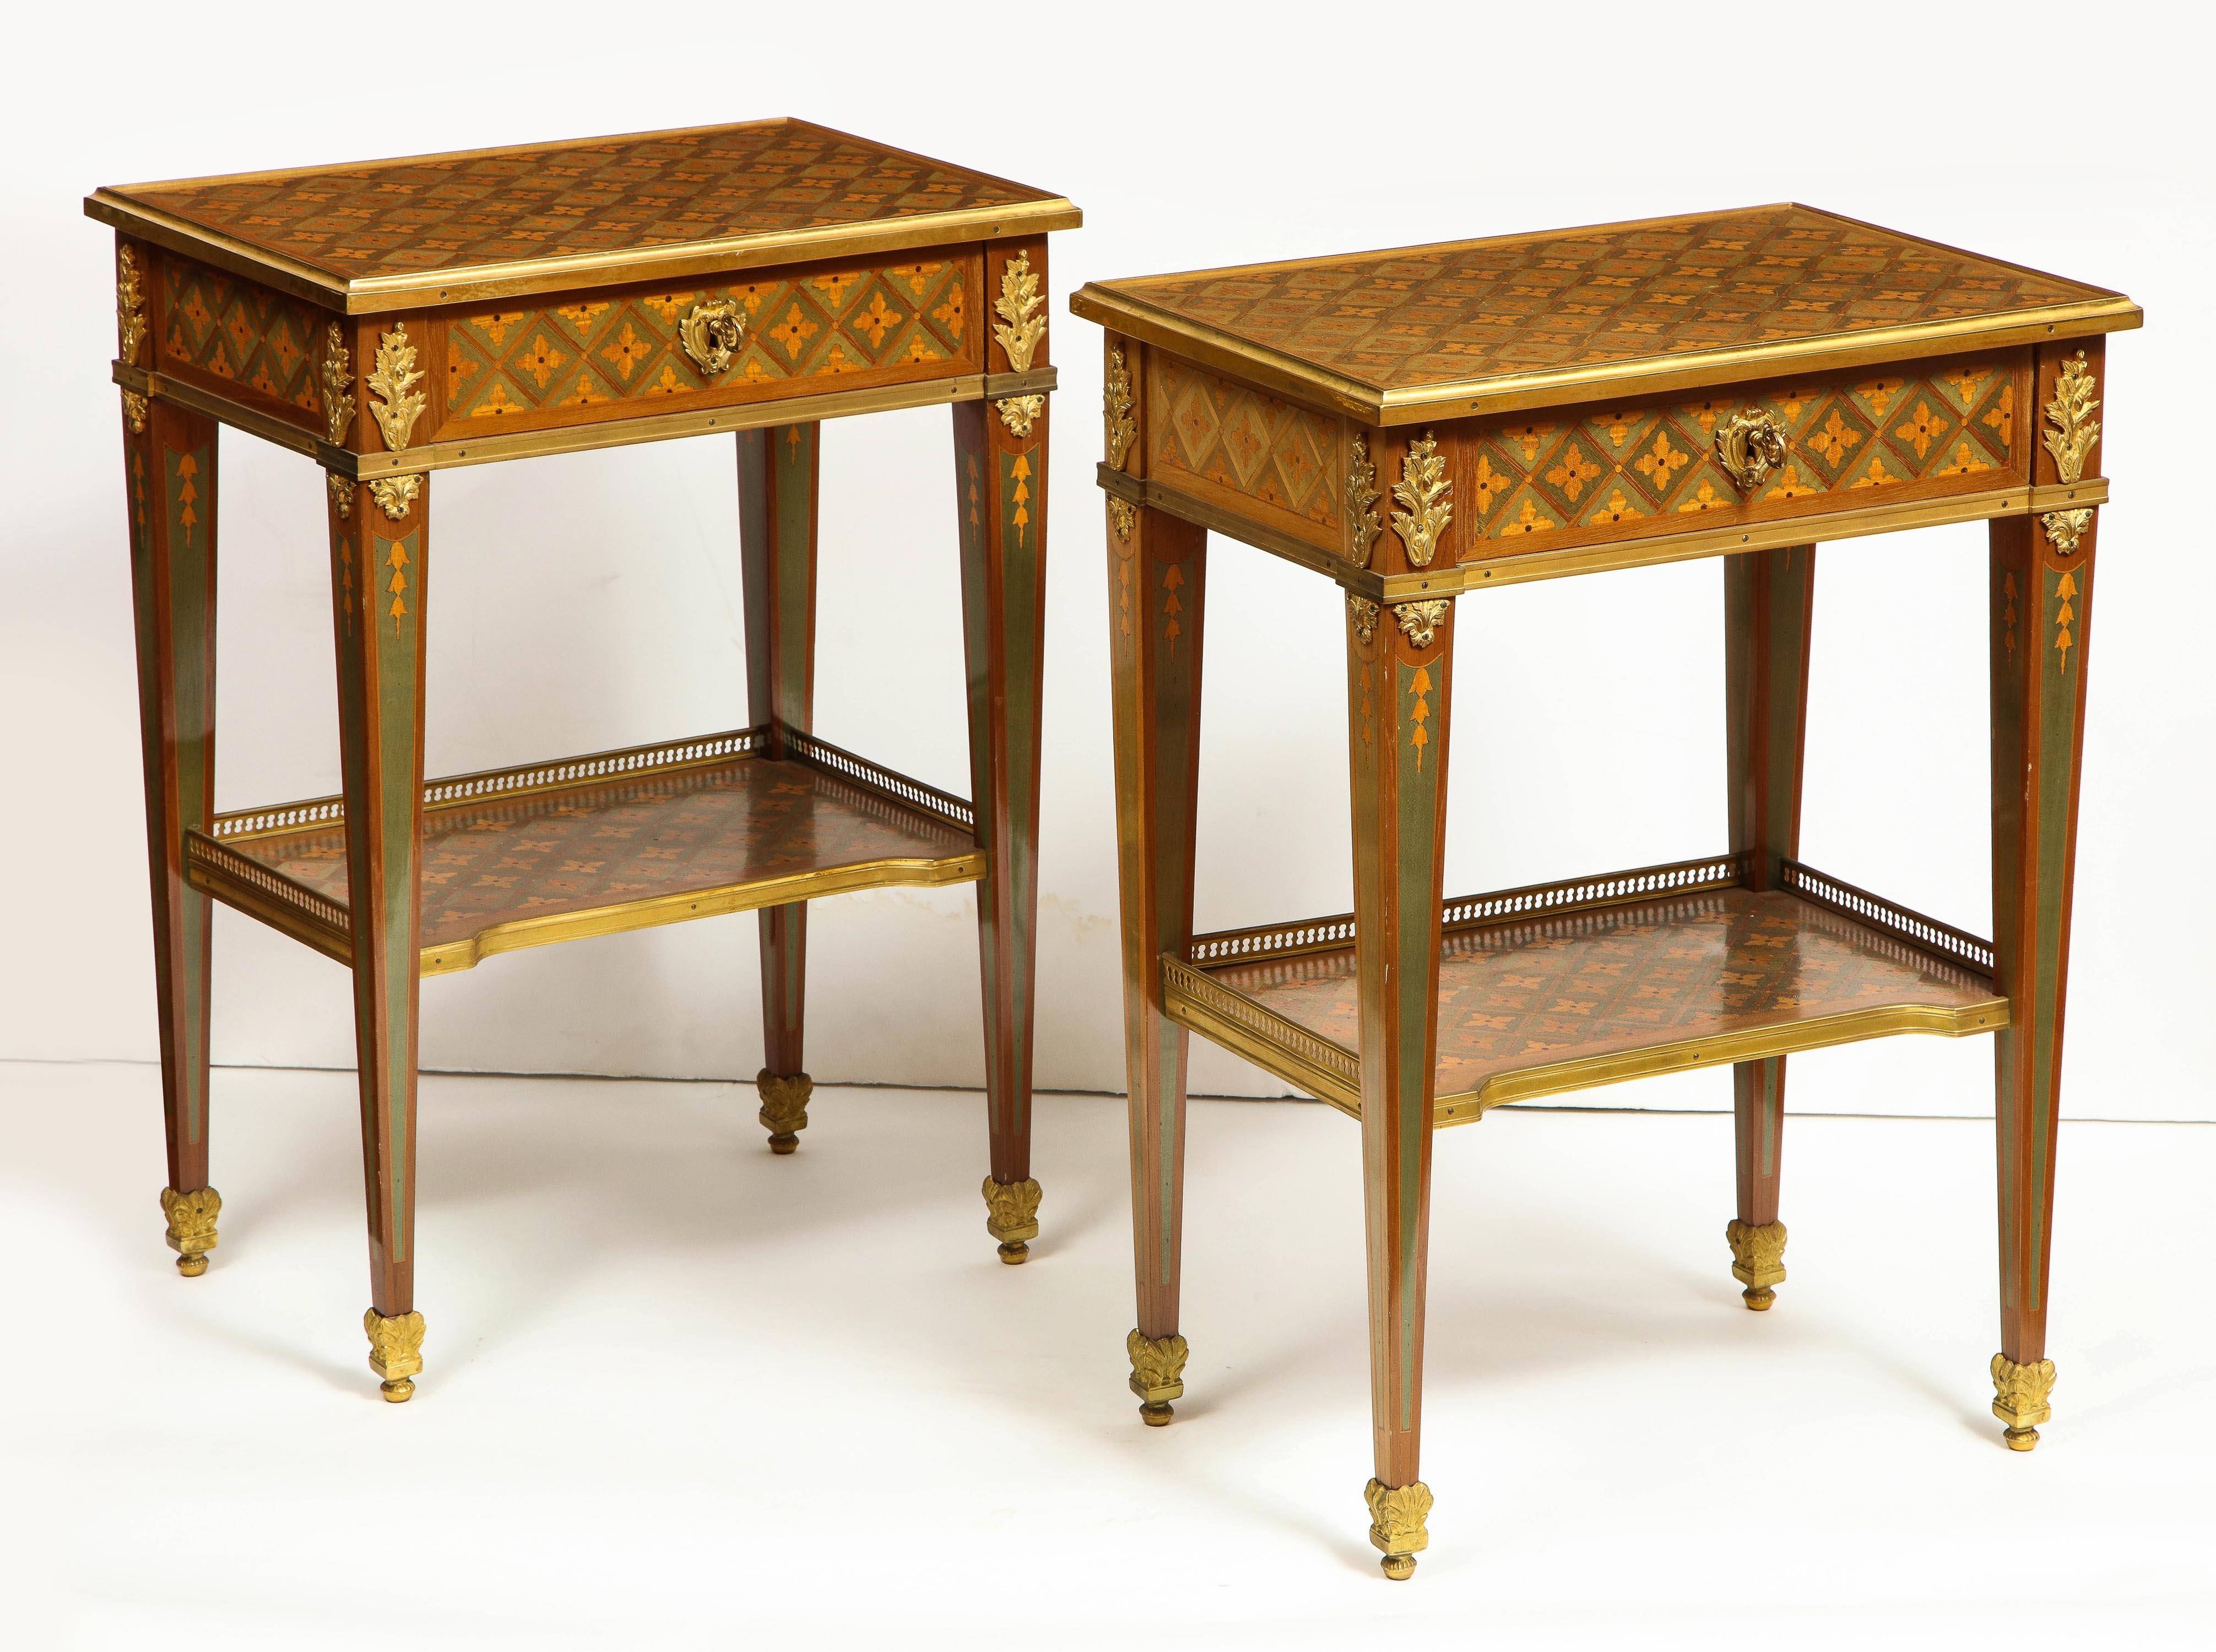 An exceptional pair of Louis XVI style french ormolu-mounted parquetry and marquetry side tables, late 19th-early 20th century, in the manner of RVLC.

These tables are truly exceptional and pure examples of sophisticated furniture form the late